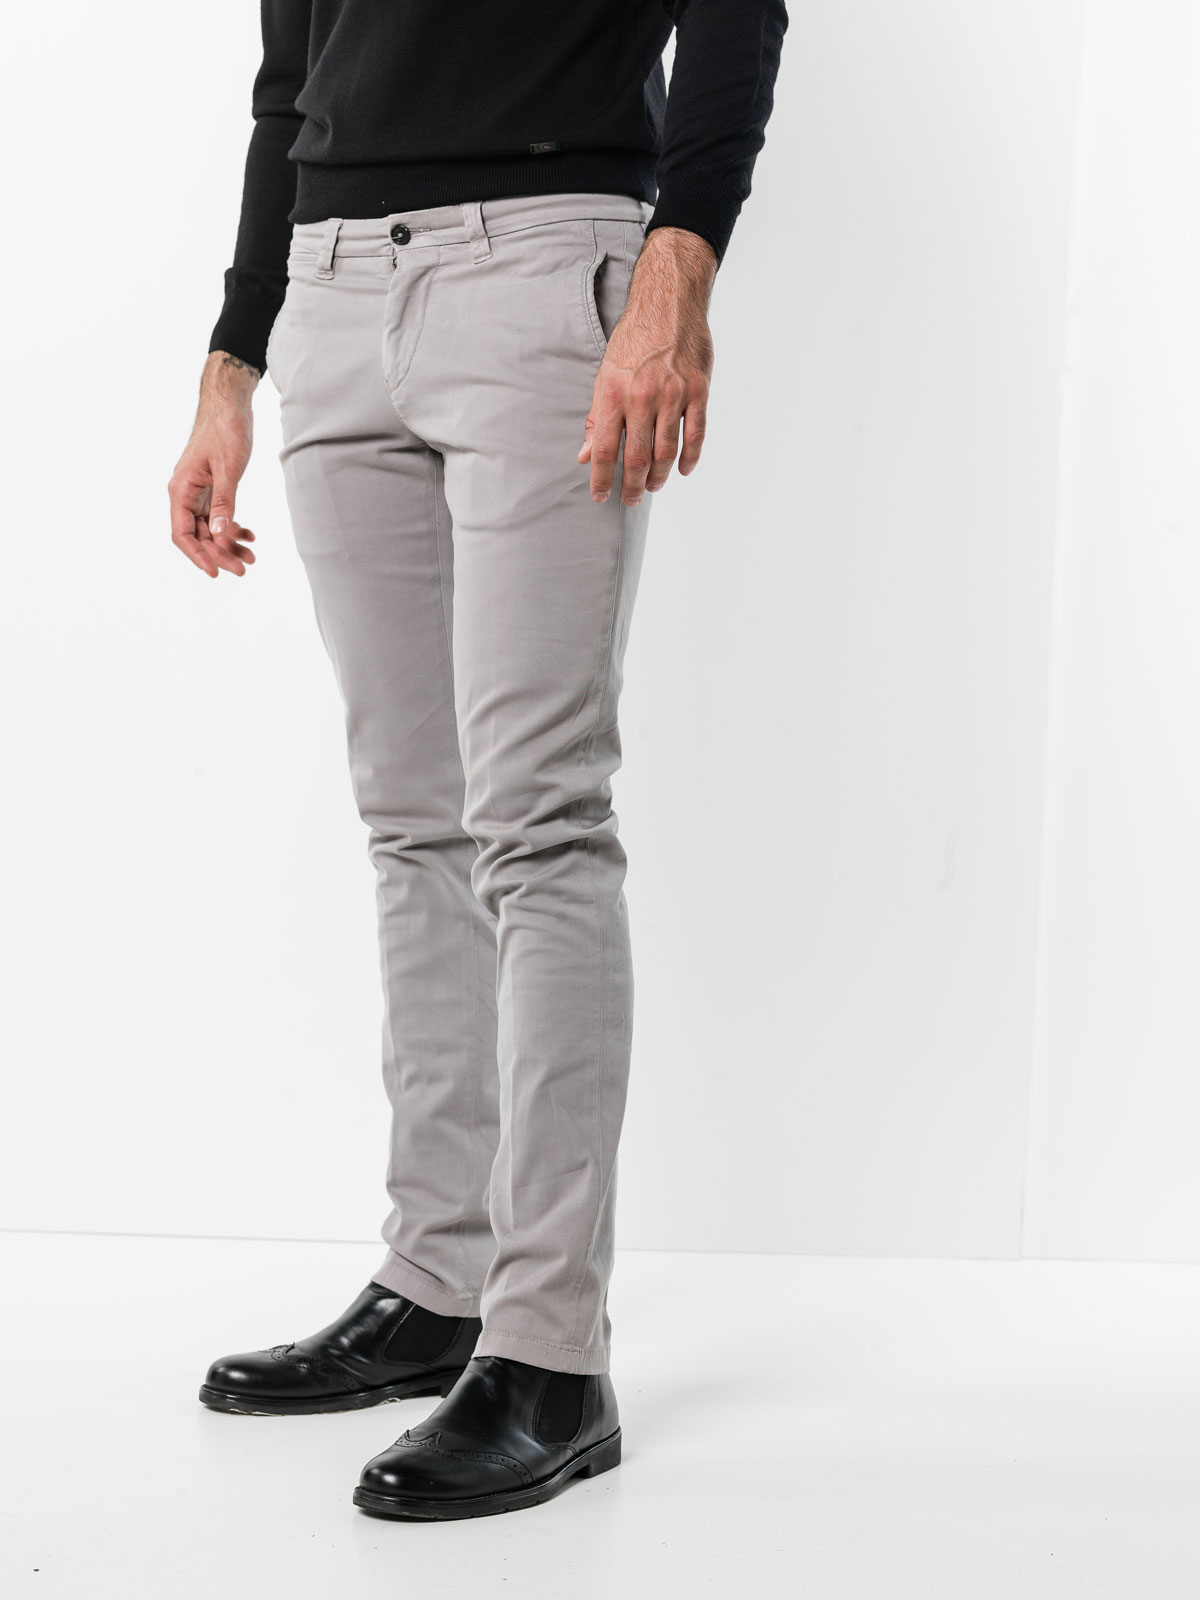 Grey Save 48% Mens Clothing Trousers Corneliani Other Materials Pants in Grey Slacks and Chinos Casual trousers and trousers for Men 